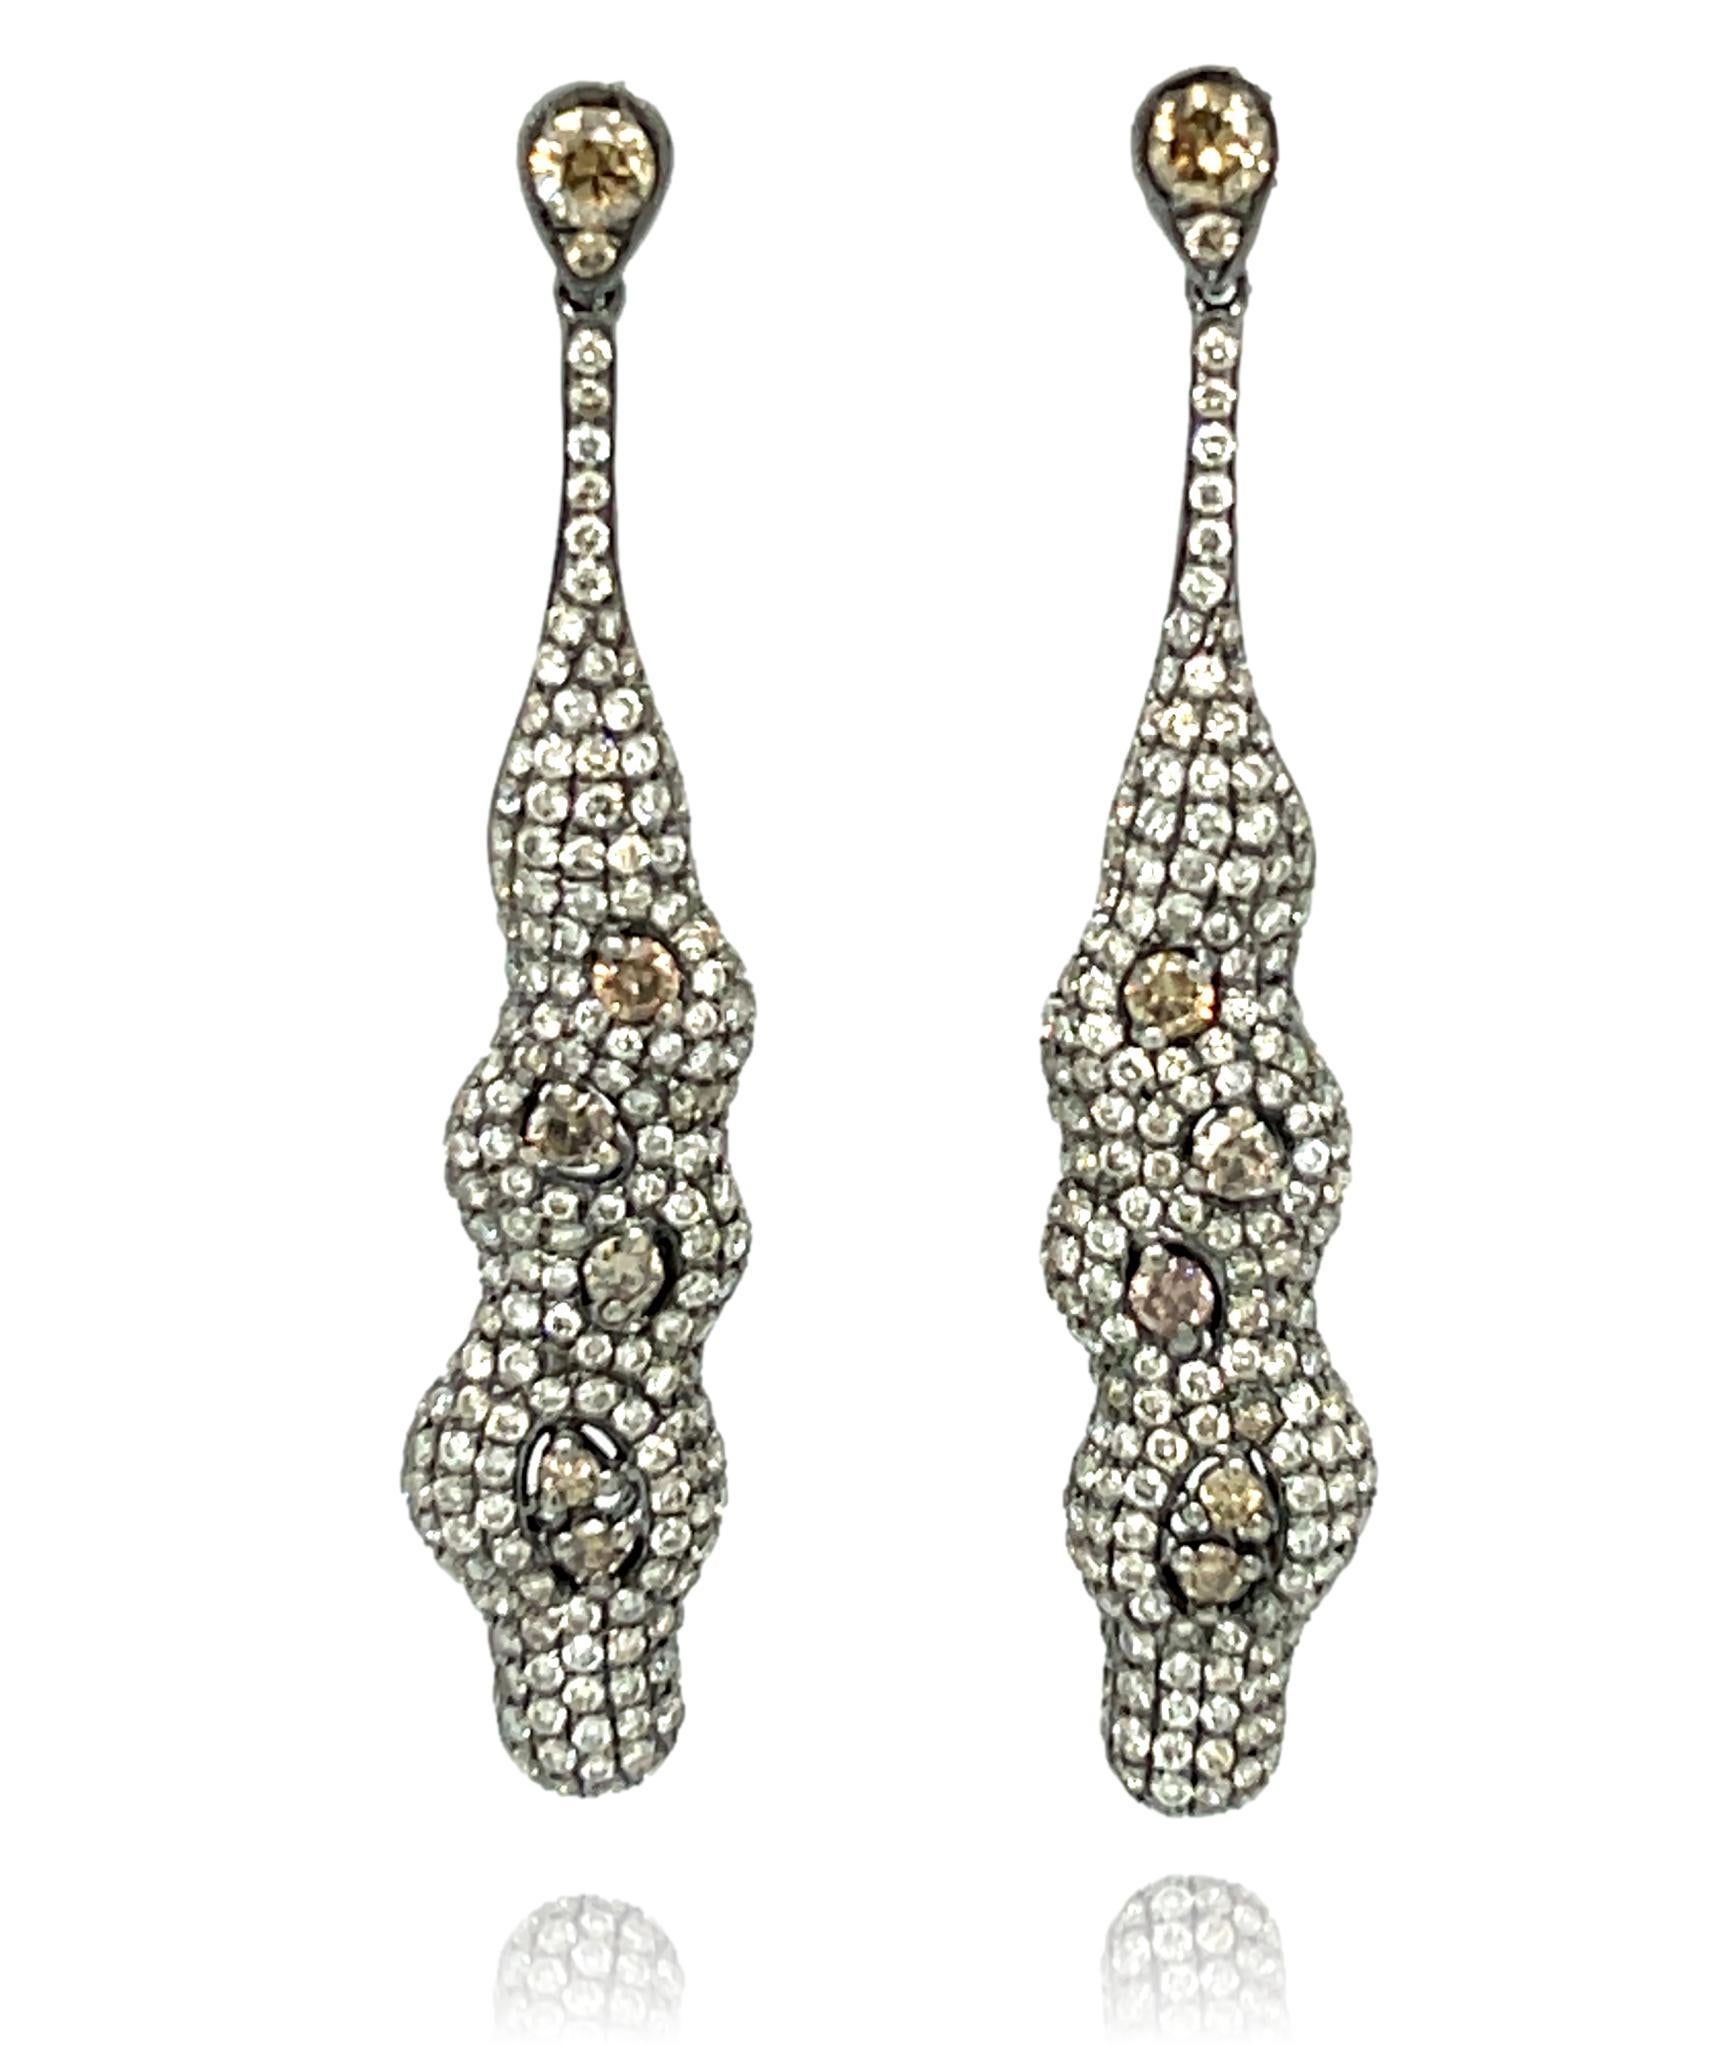 These stunning dangling earrings are surrounded with fancy Champagne and White diamonds and set in 18K gold. They have double lock closure for extra security. These earrings come in a beautiful box ready for the perfect gift! 

18KW:          7.05